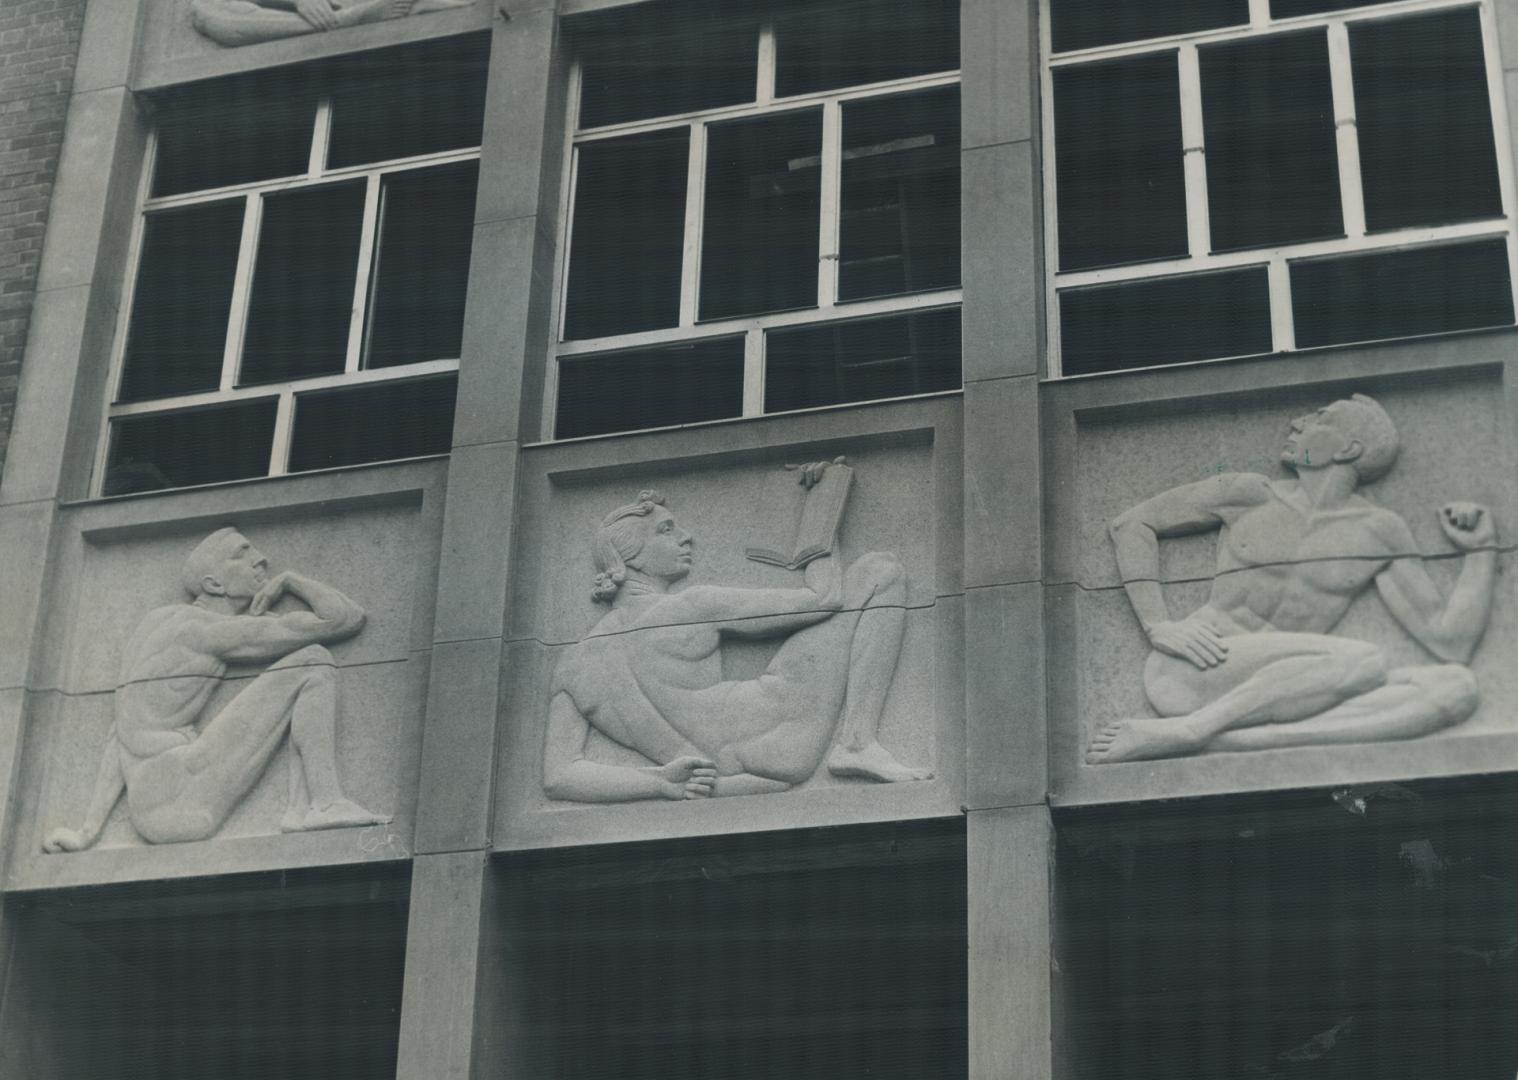 Ryerson students and instructions are hot under their collars over stone scultpure depicting nude students supposedly engaged in various Ryerson activ(...)